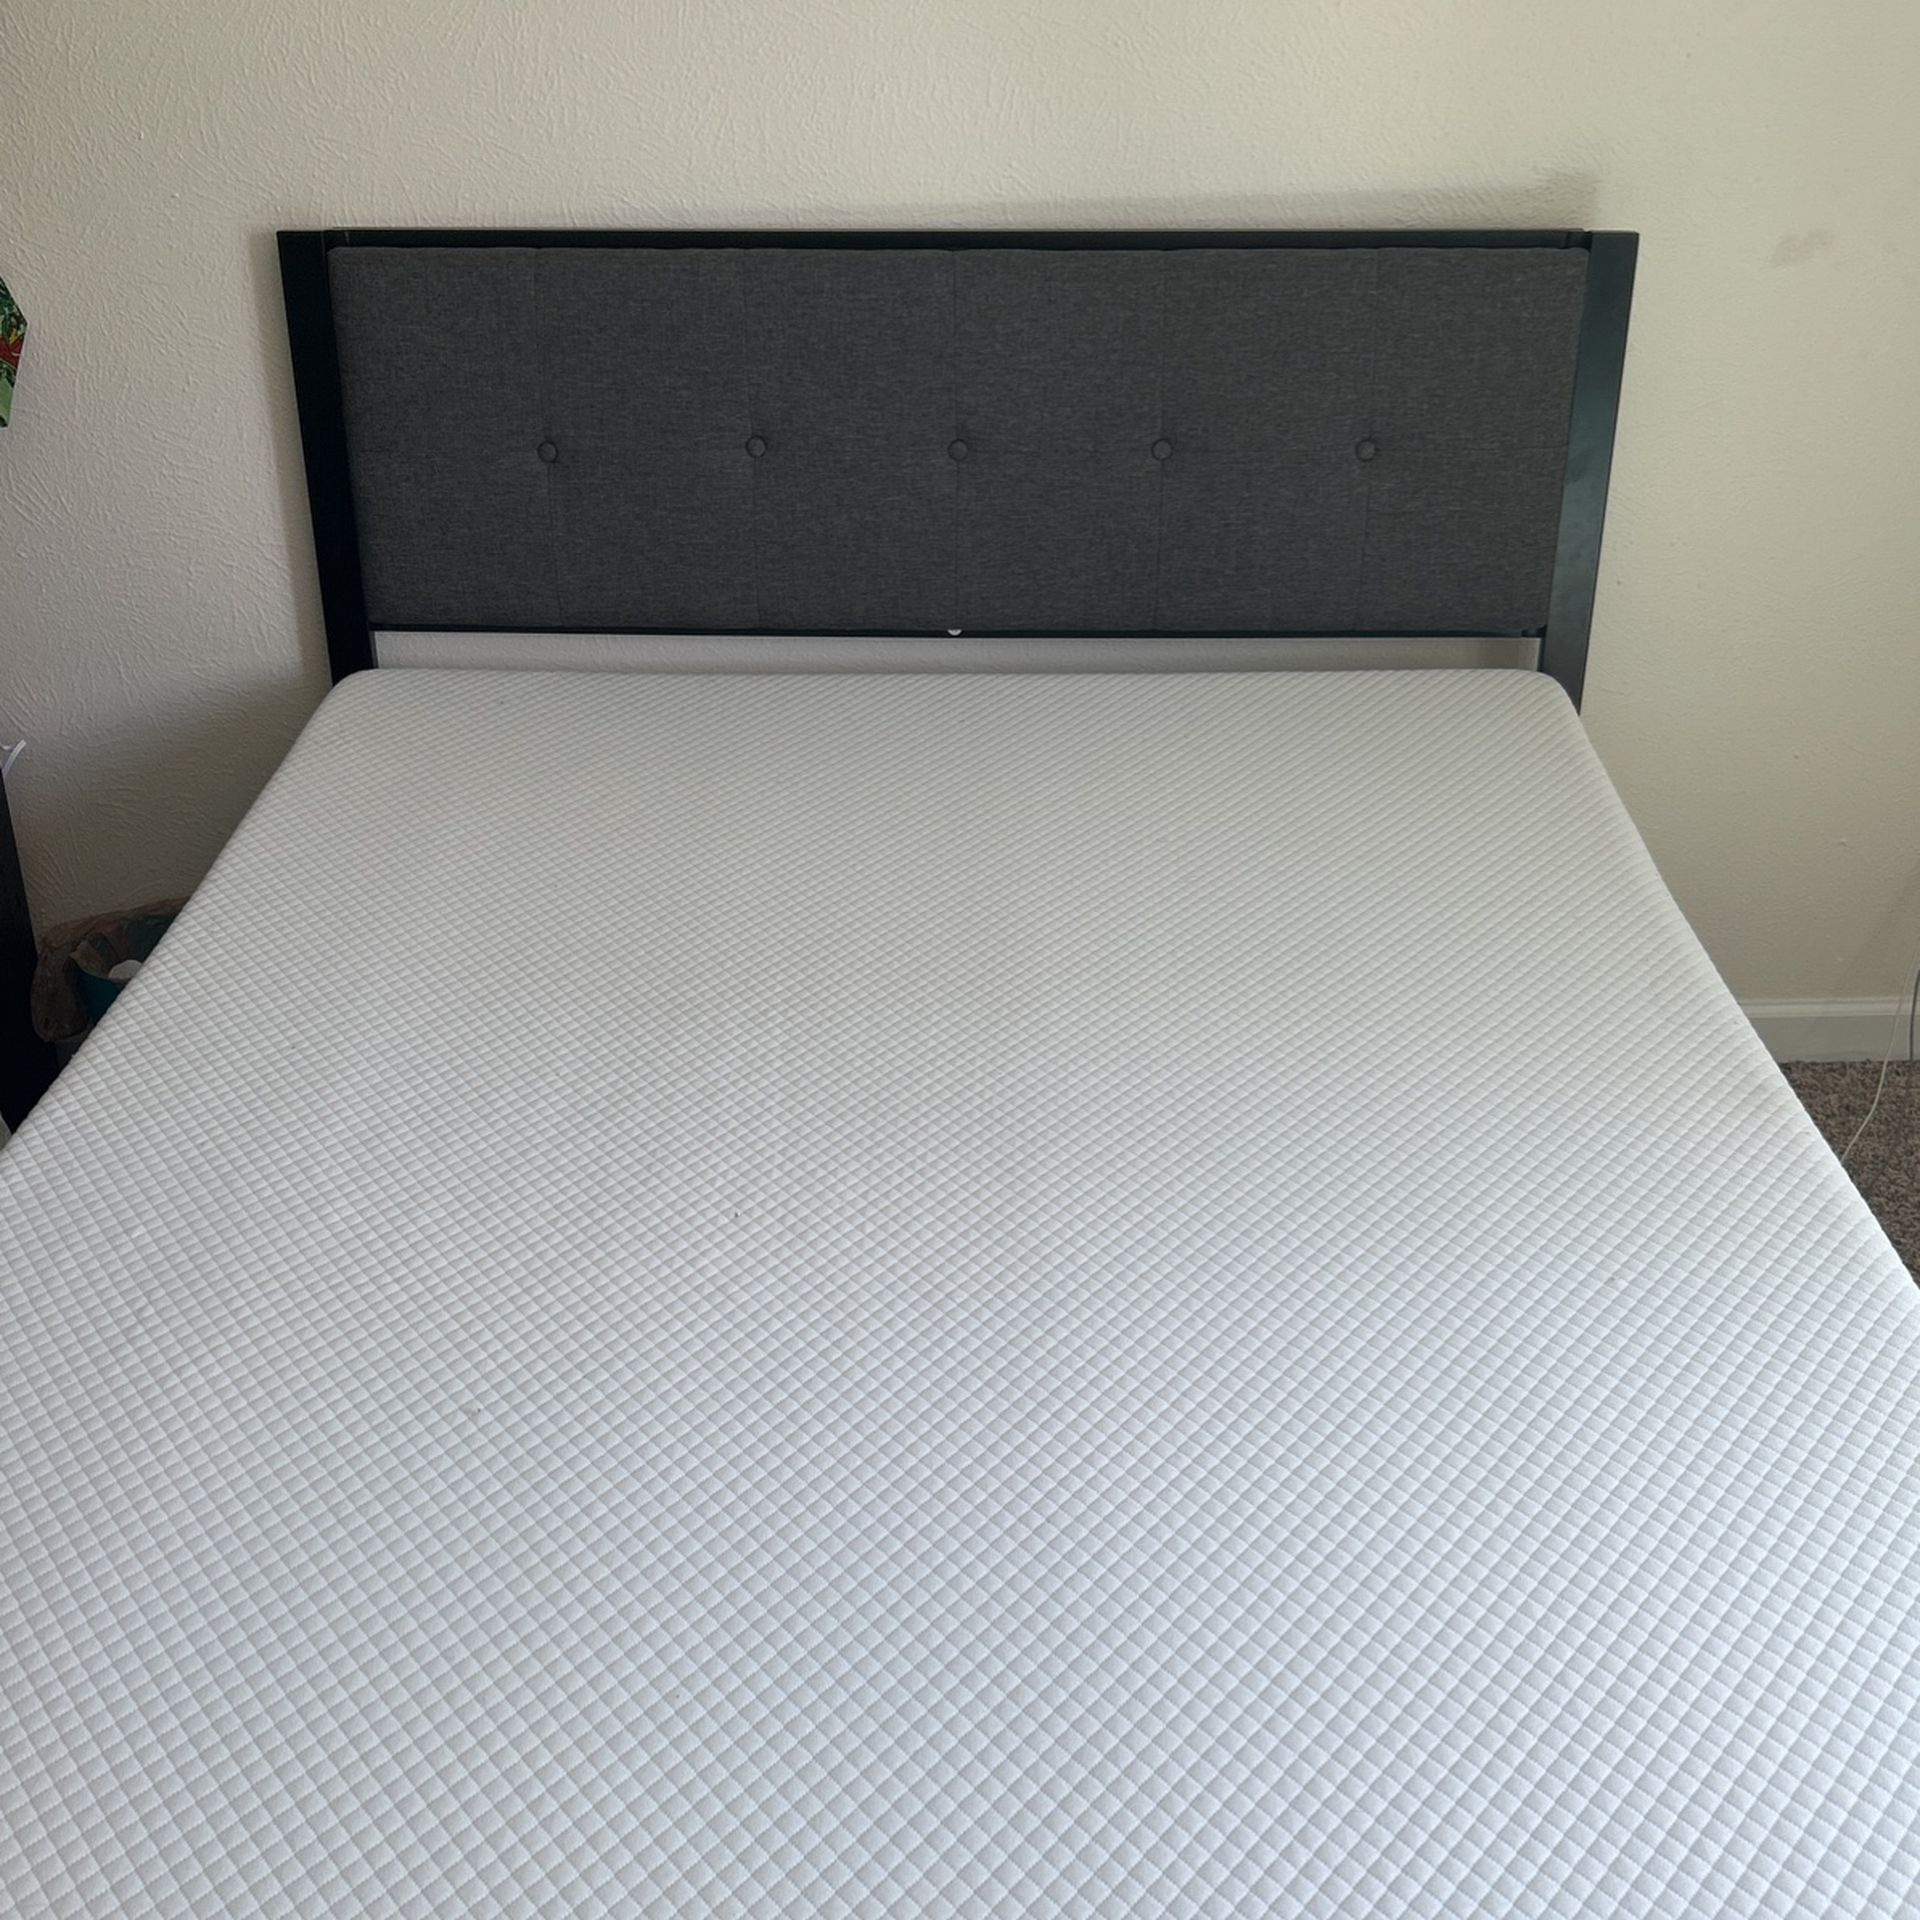 Full Size Bed Frame And Mattress Set